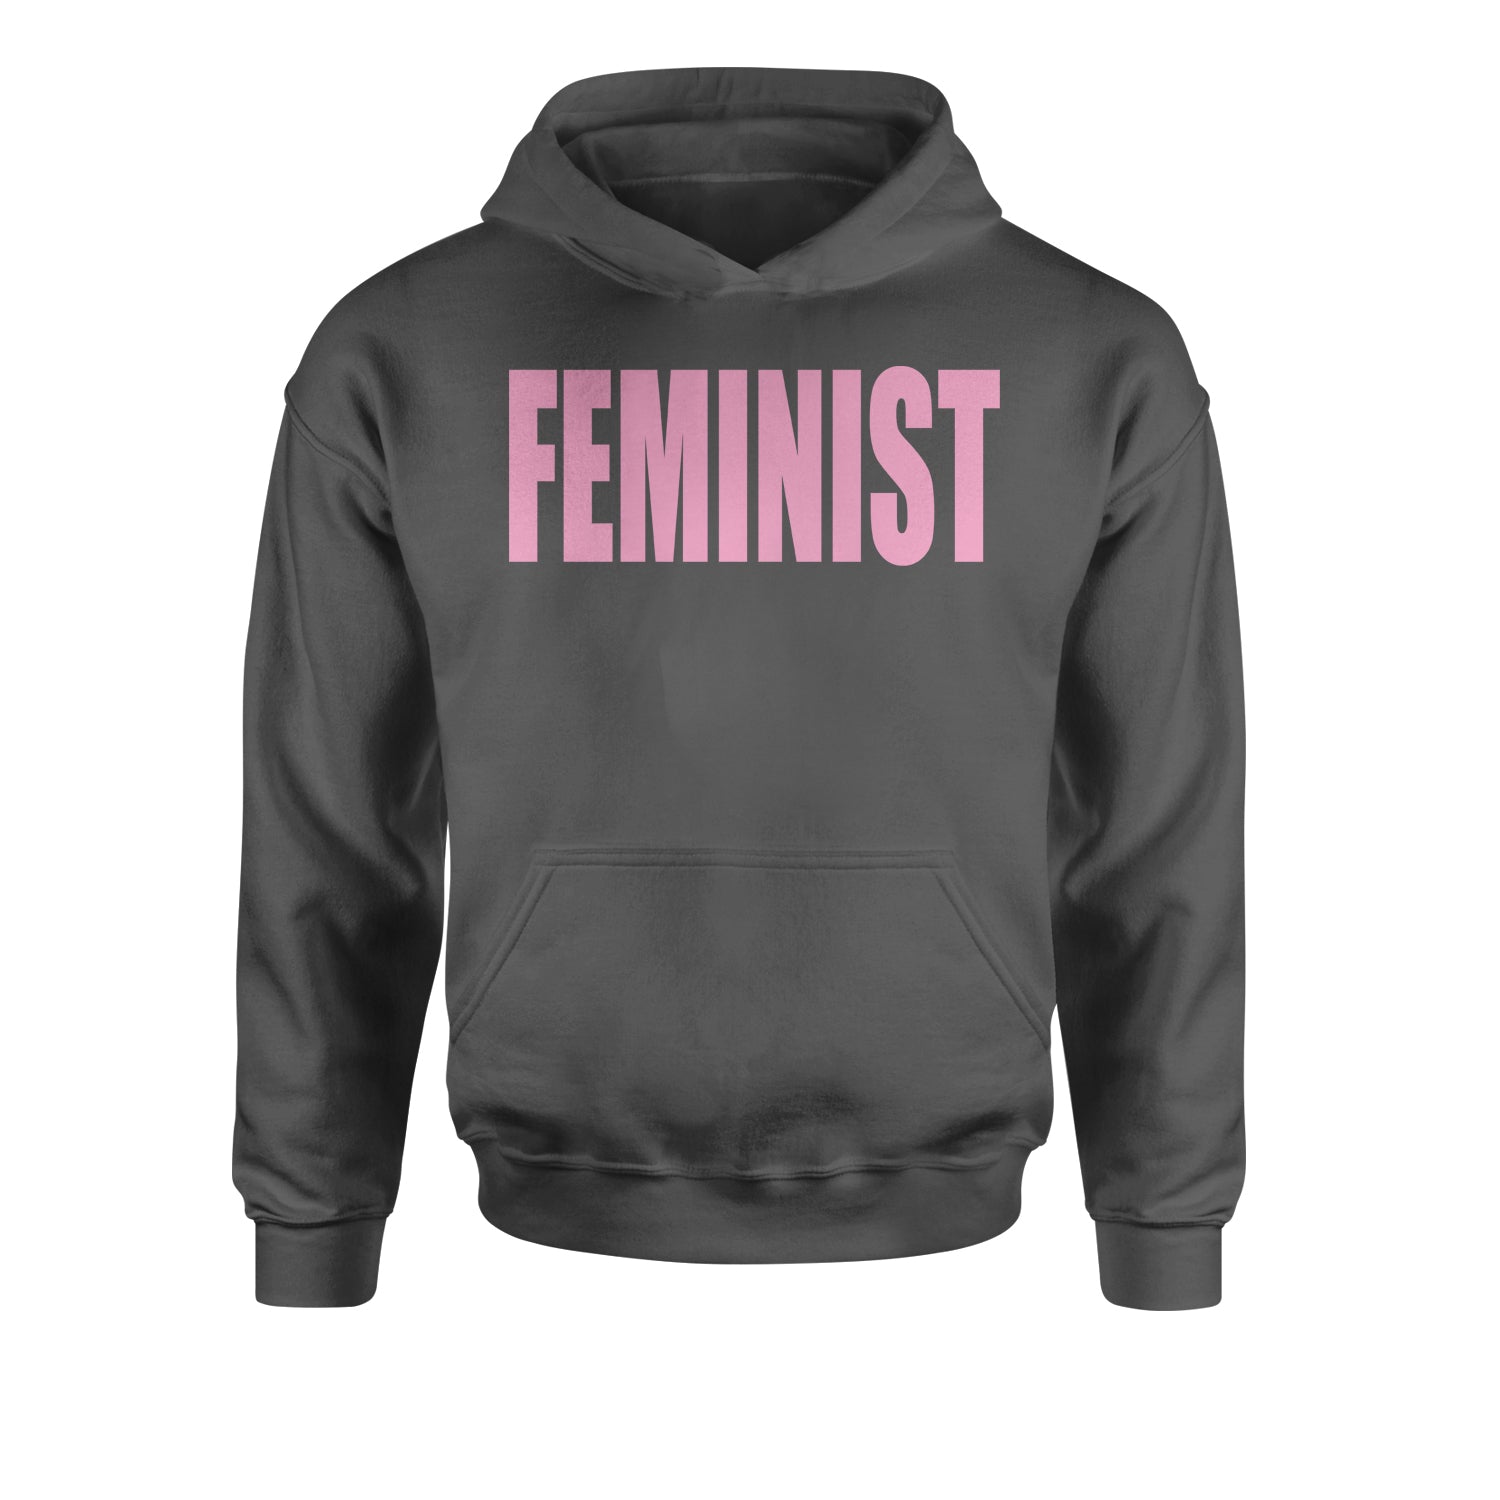 Feminist (Pink Print) Youth-Sized Hoodie a, equal, equality, feminism, feminist, gender, is, lgbtq, like, looks, nevertheless, pay, persisted, rights, she, this, what by Expression Tees